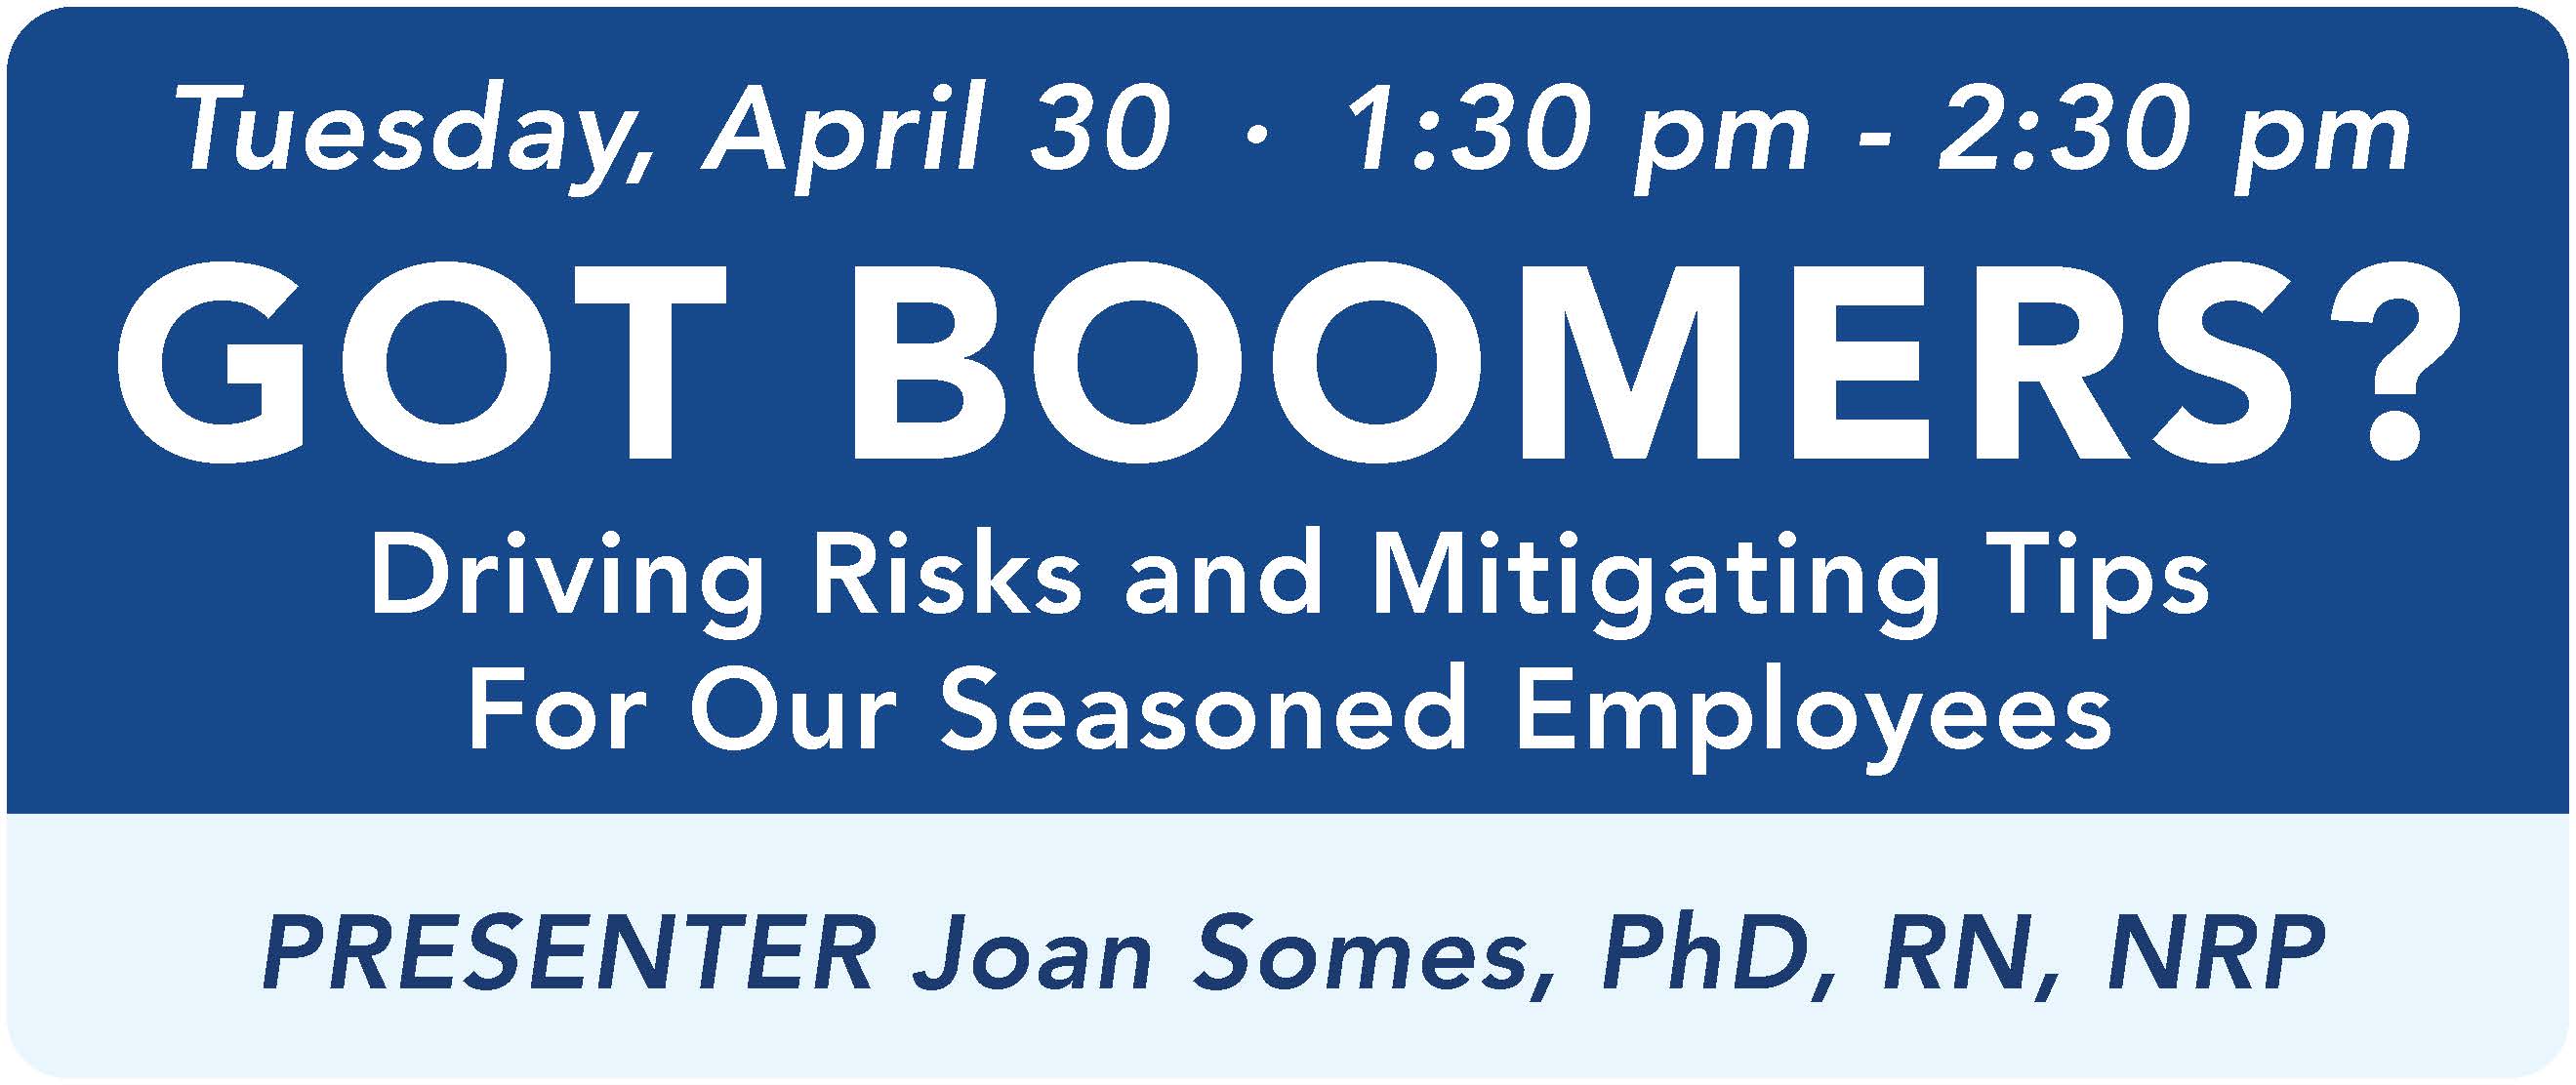 card for Got Boomers? Driving Risks and Mitigating Tips for our Seasoned Employees